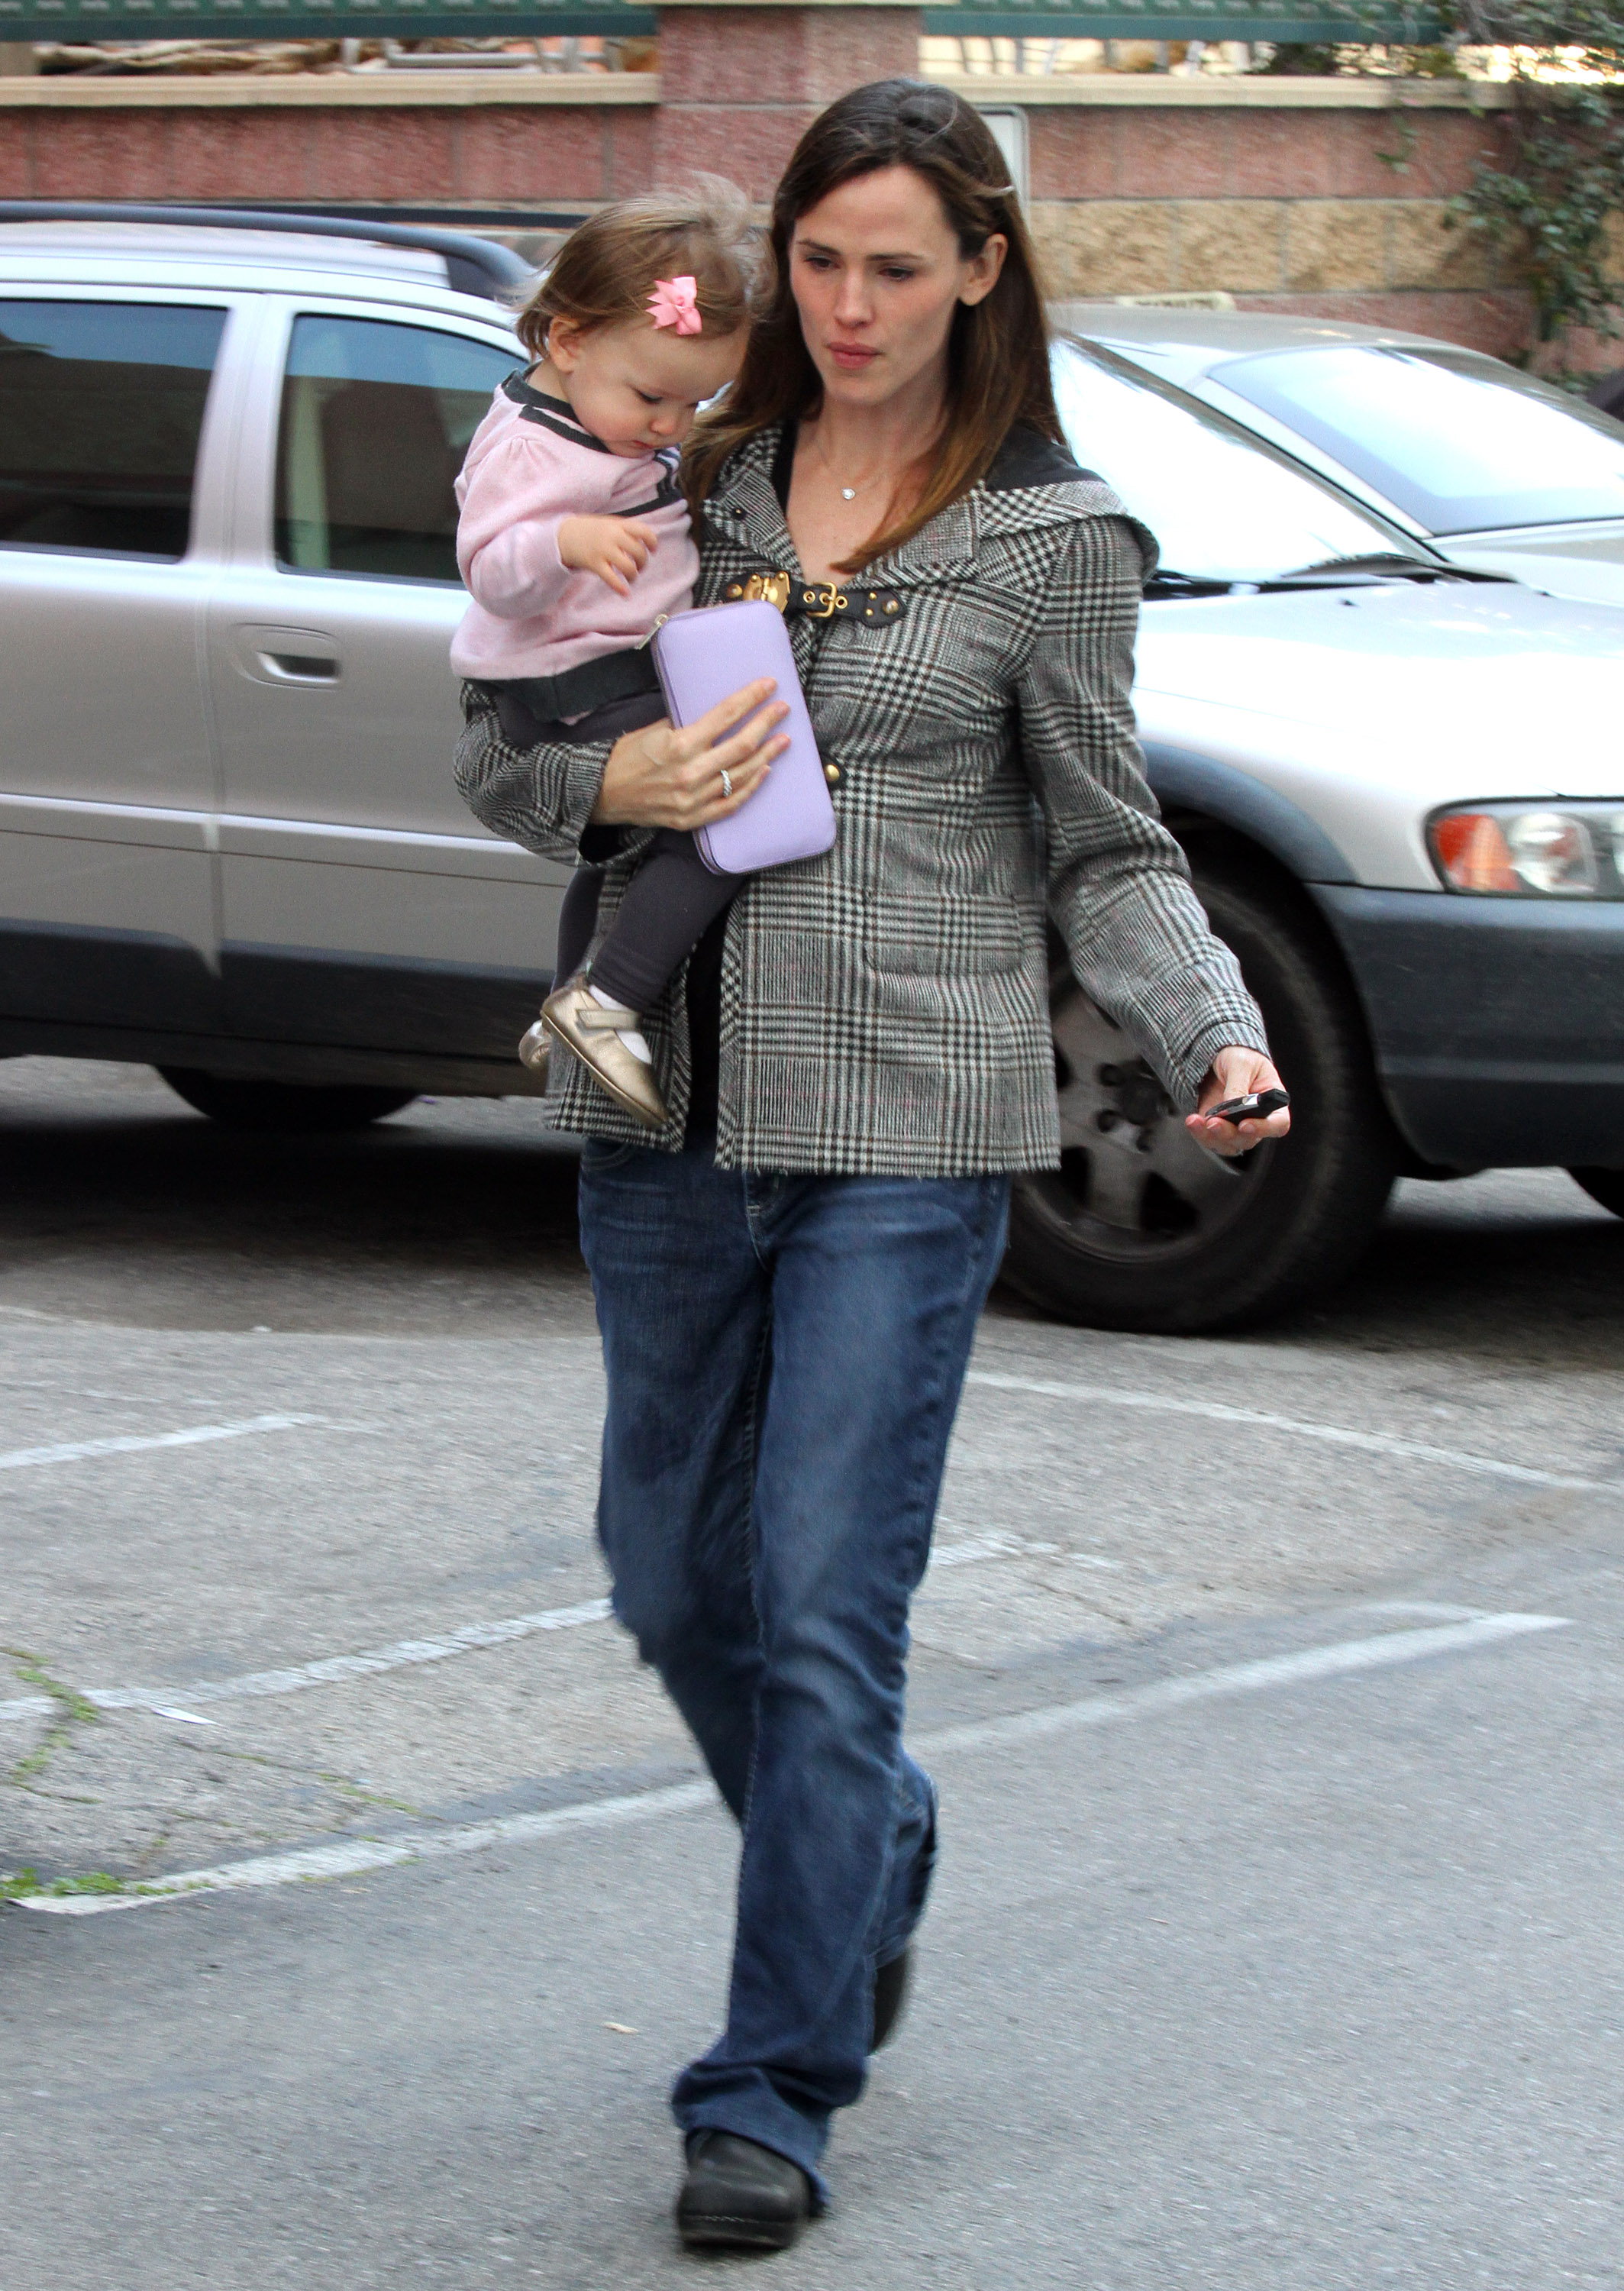 Jennifer Garner and Seraphina Affleck seen on March 13, 2010 in Santa Monica, California. | Source: Getty Images